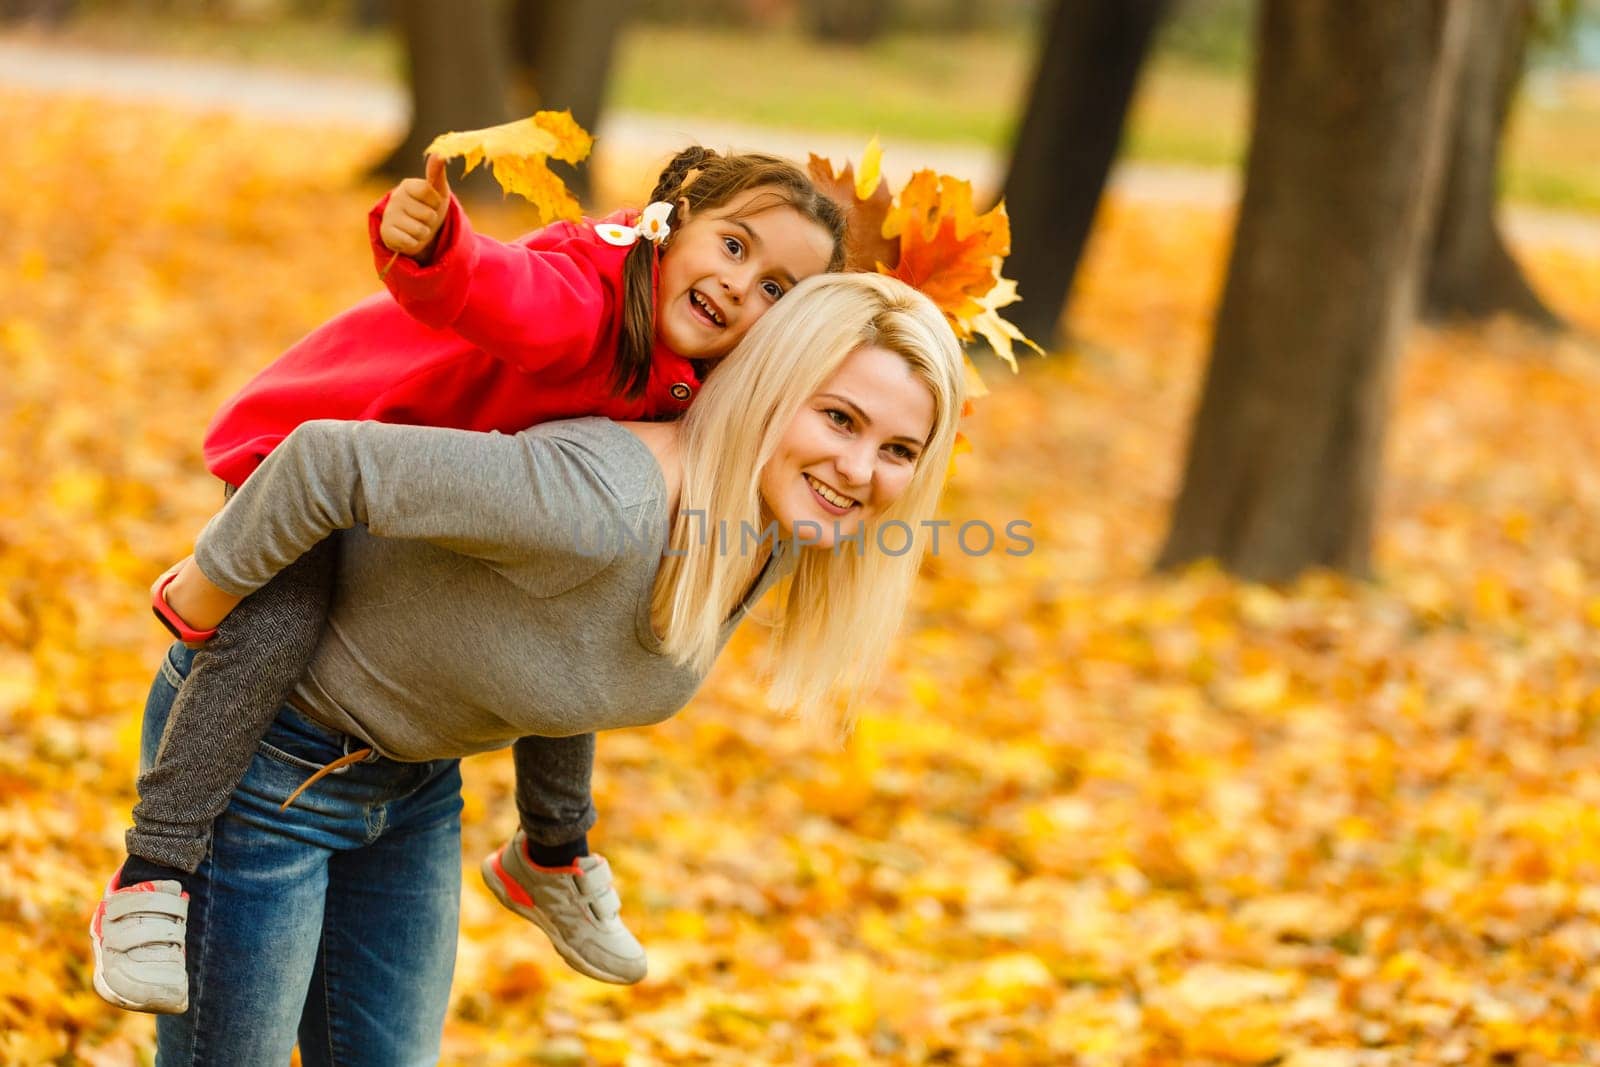 mother and daughter in the city park in autumn having fun time